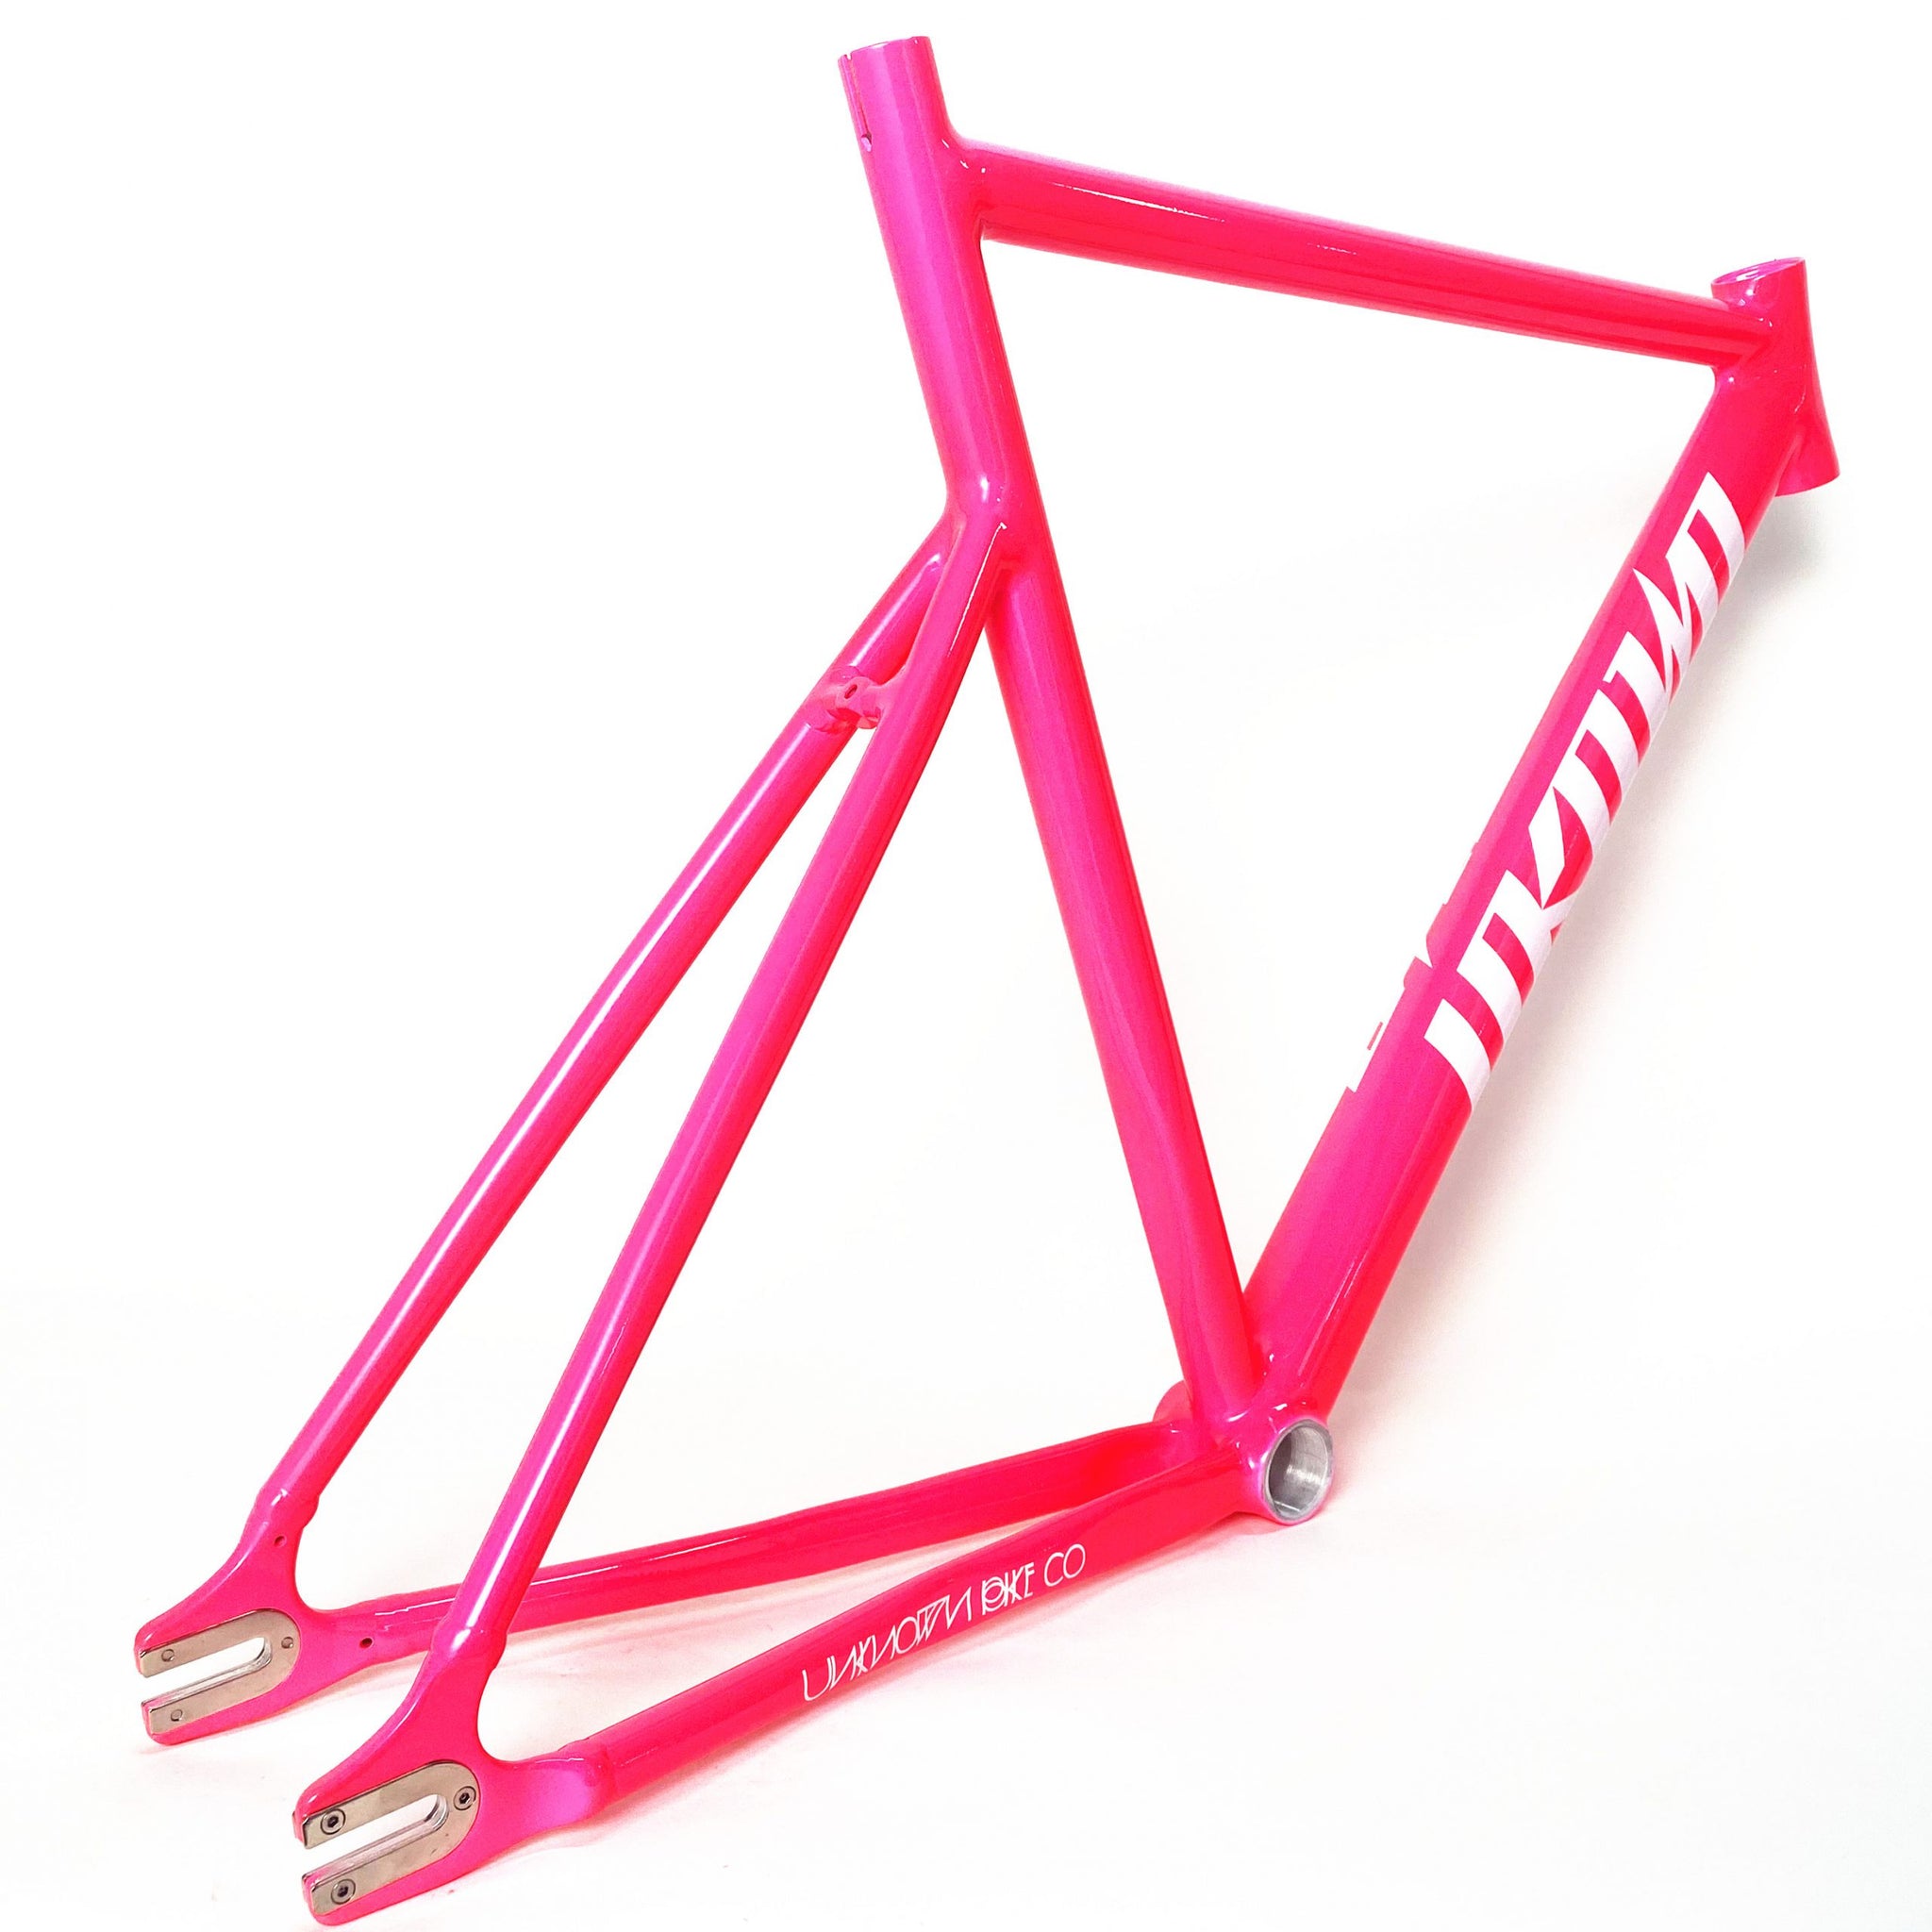 Unknown PS1 Fixie Frameset Bicycle Frames 549.99 Atelier Olympia